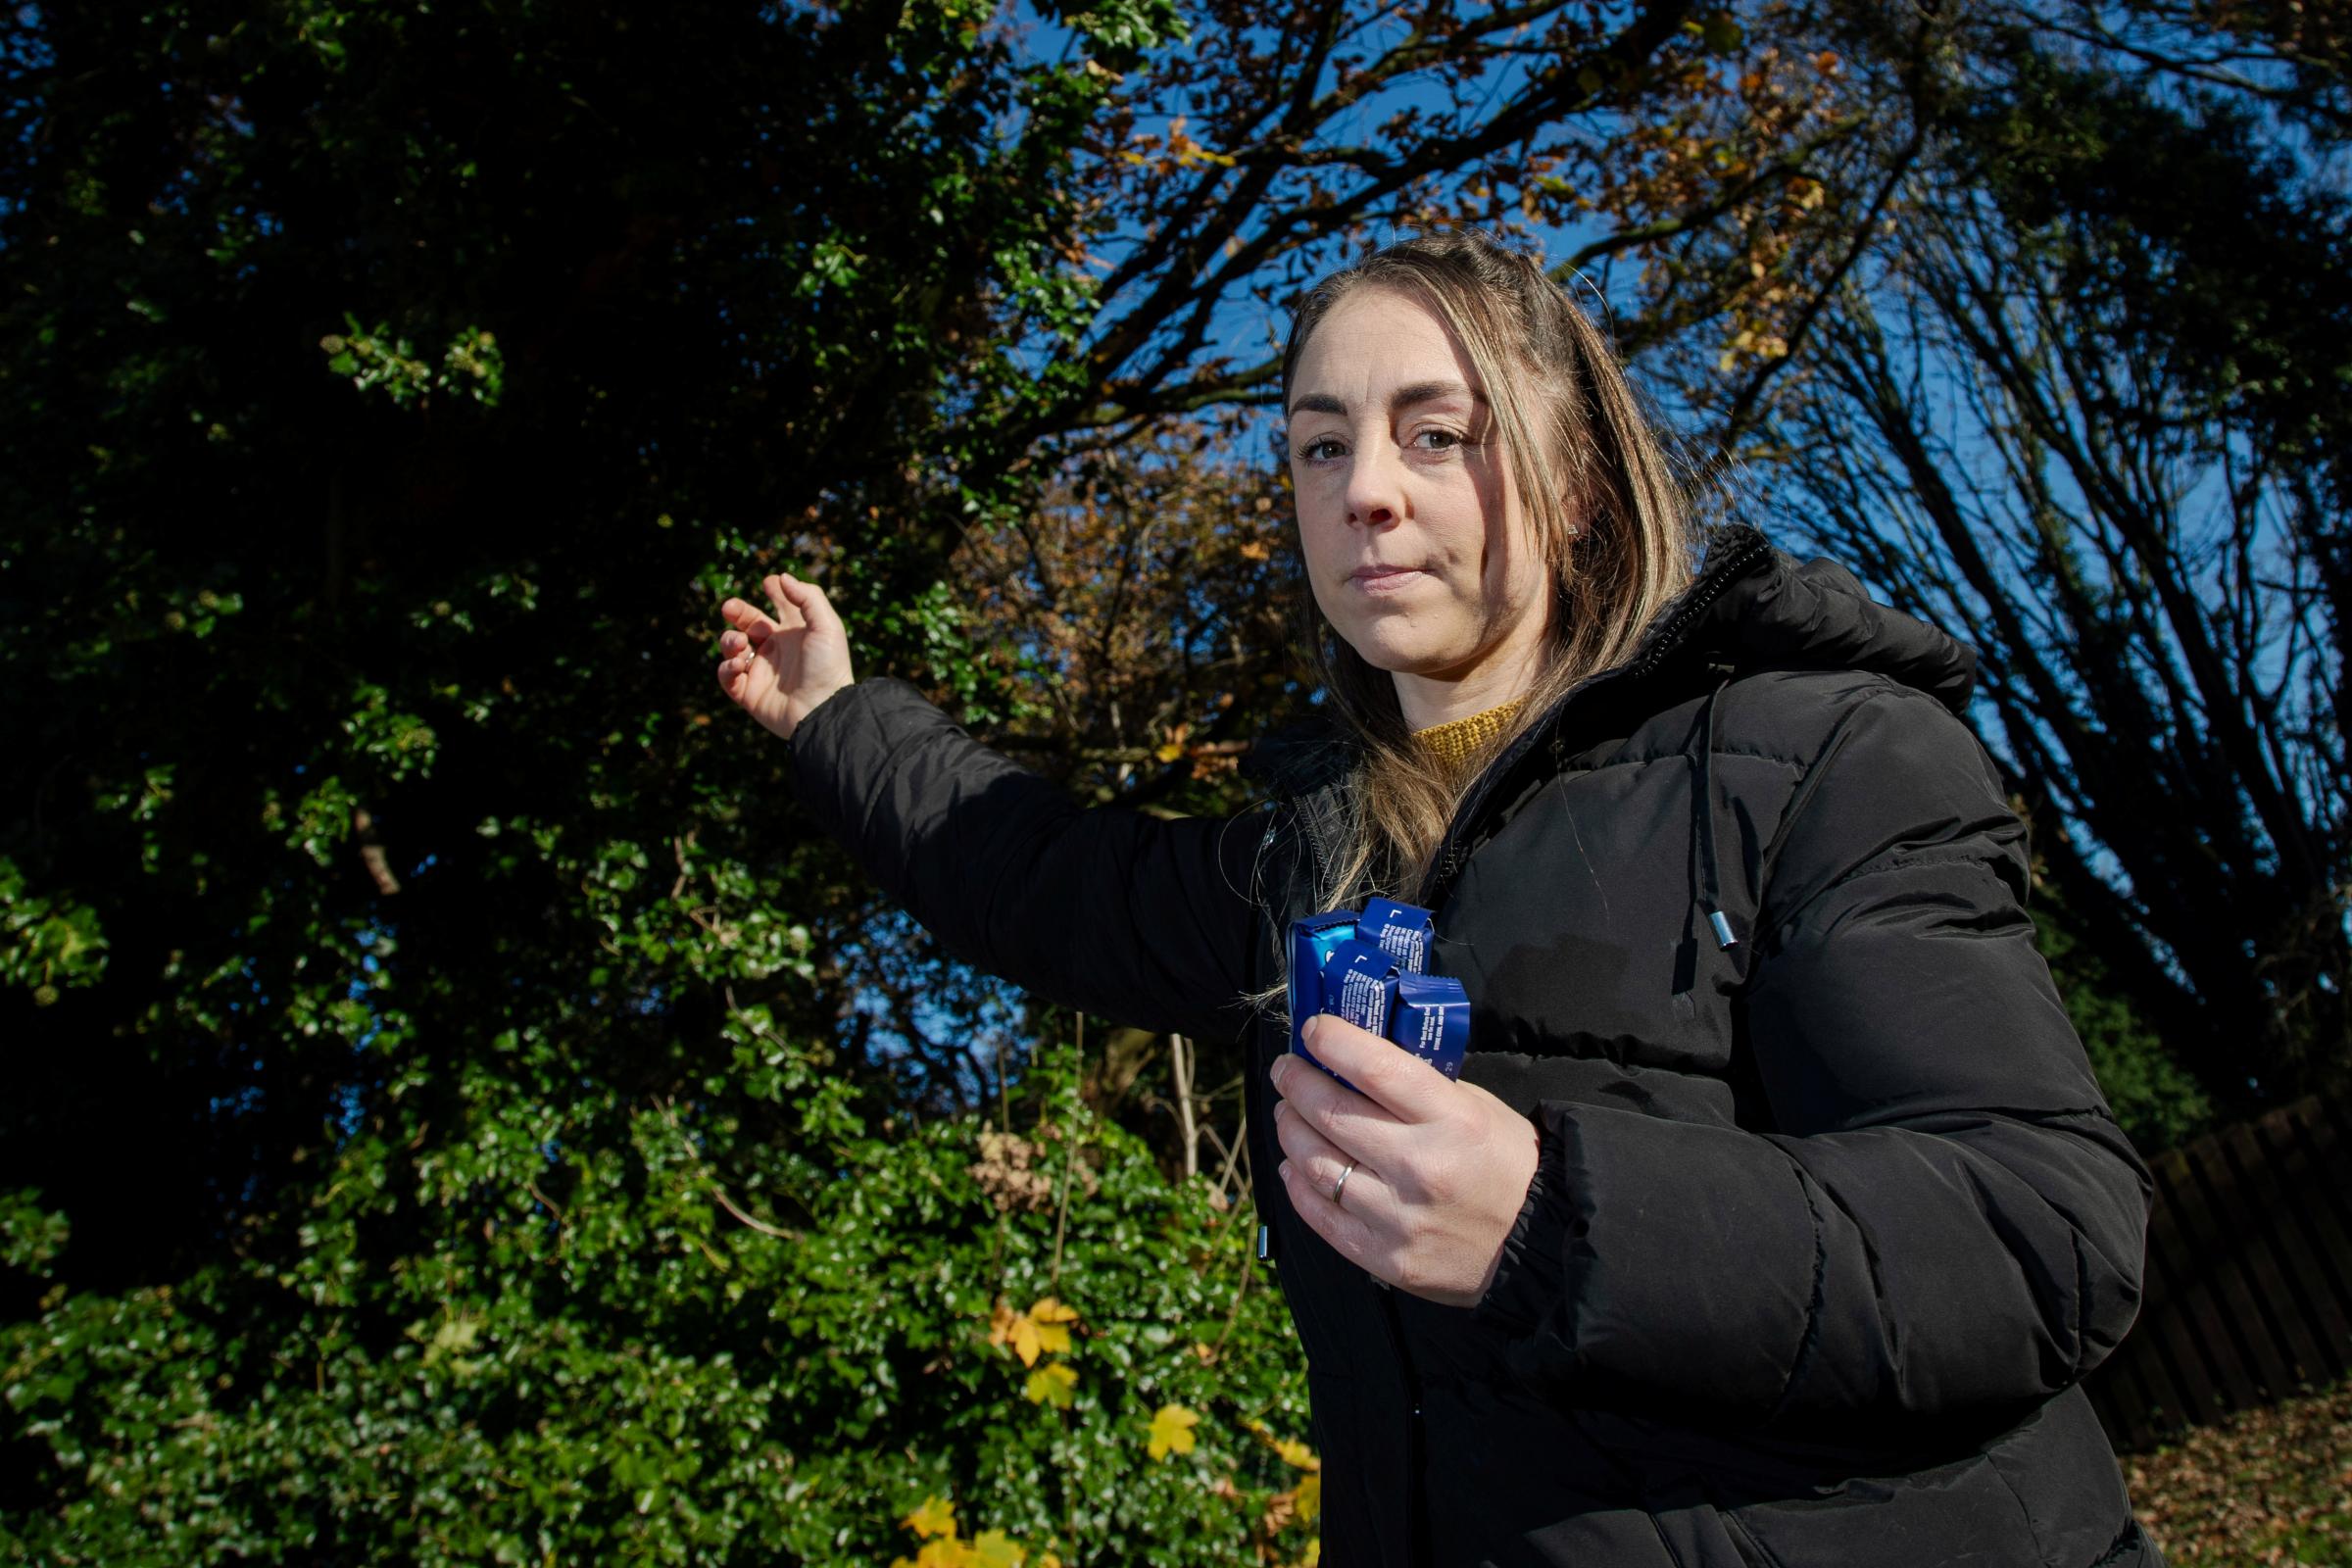 Fiona Downes, 33, Sales Assistant from Ellesmere Port, is a resident on the estate and has been finding chocolate bars in the leaves. 